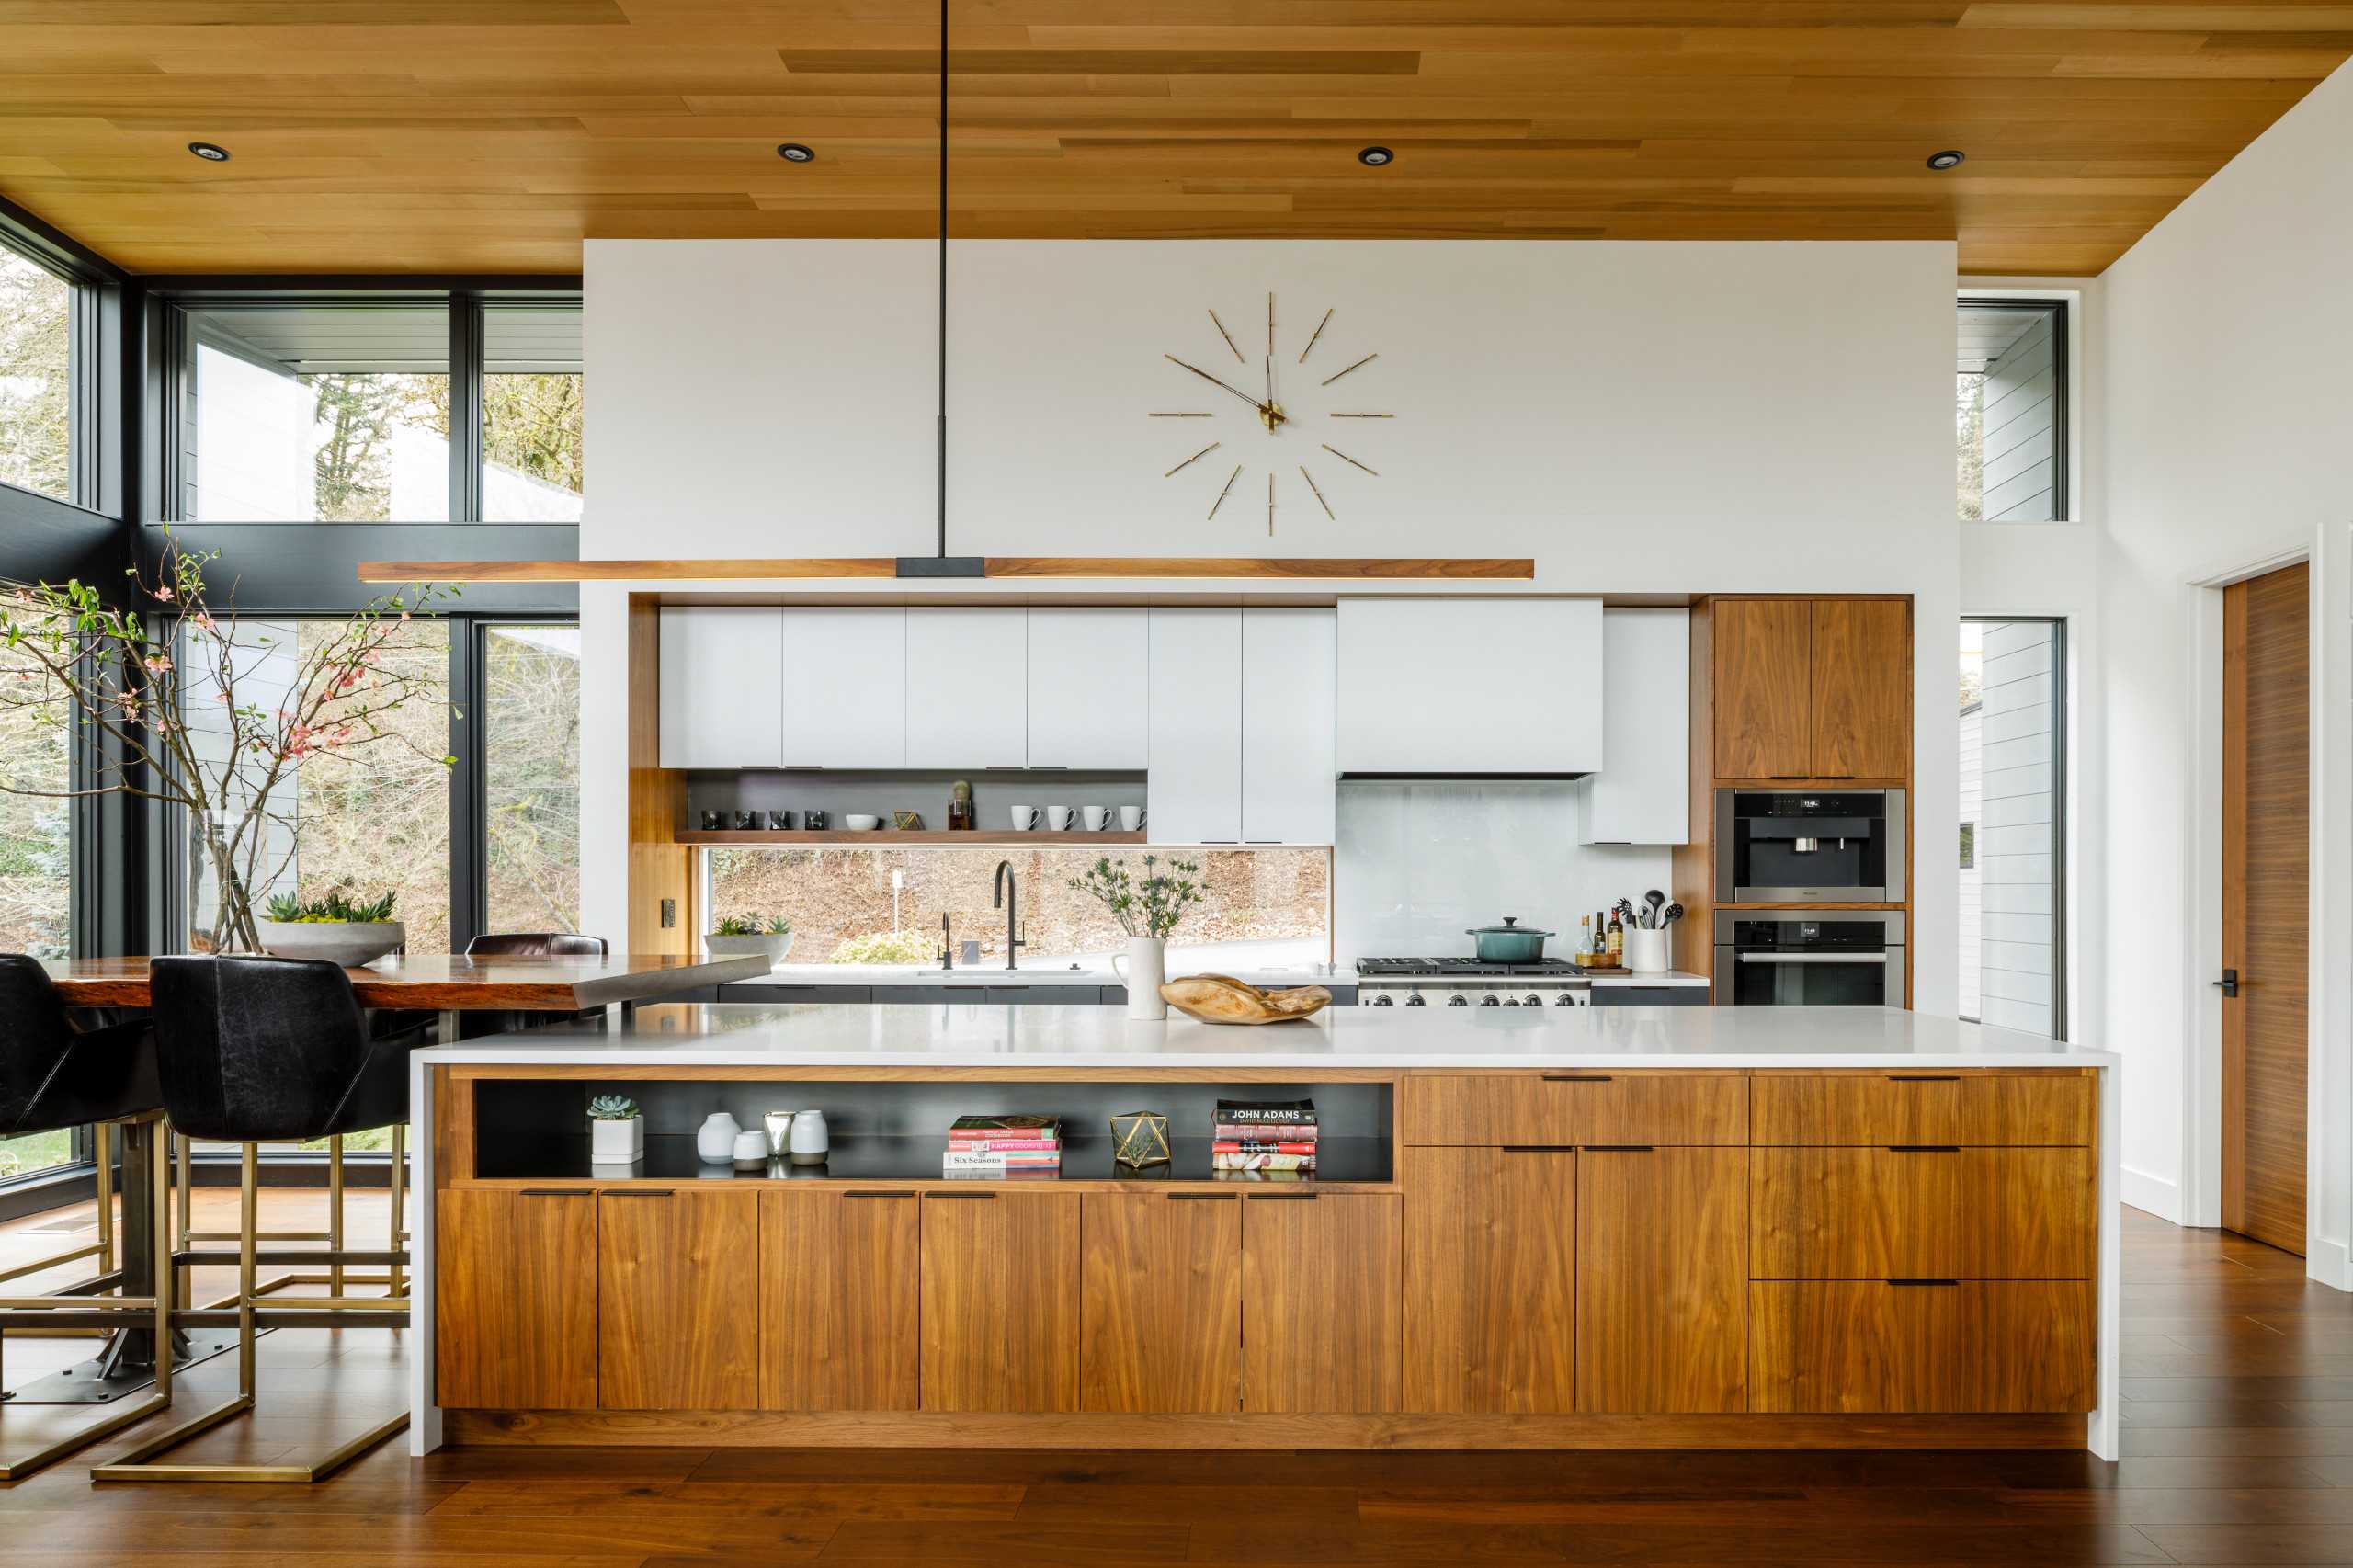 20 Mind Blowing Mid Century Modern Kitchen Designs You Will Obsess Over 17 